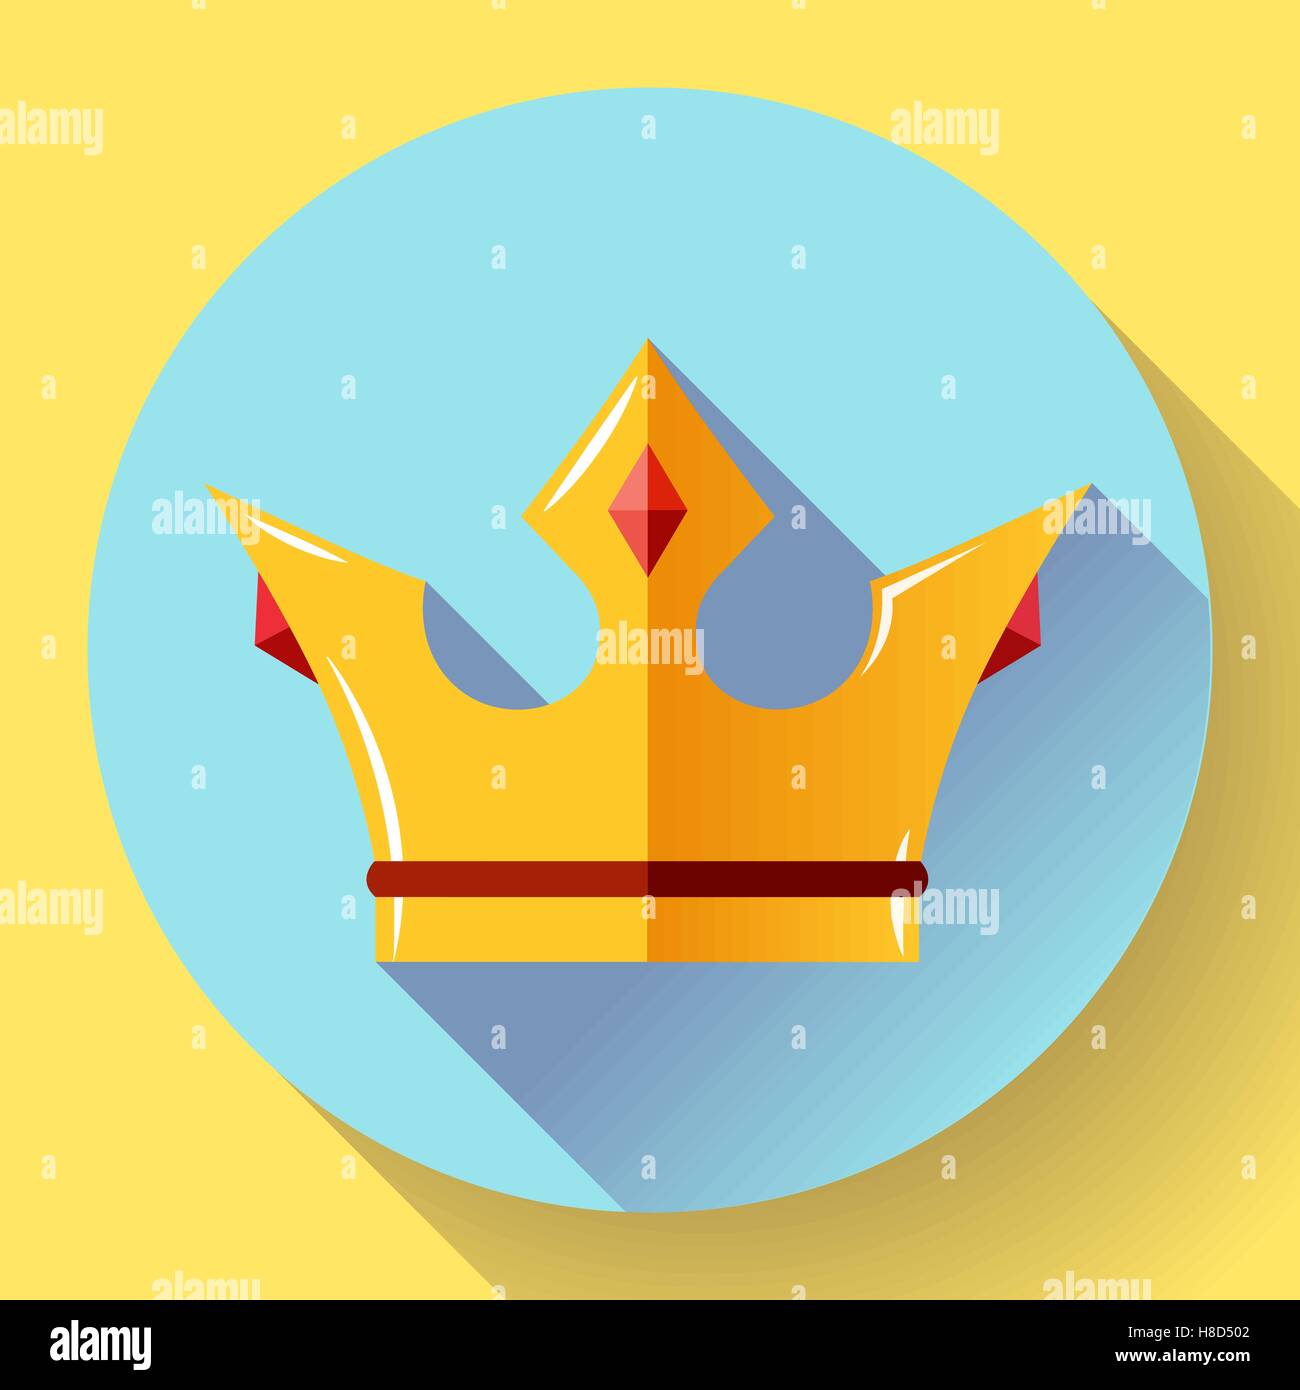 Gold crown with rubies. Flat design style Stock Vector